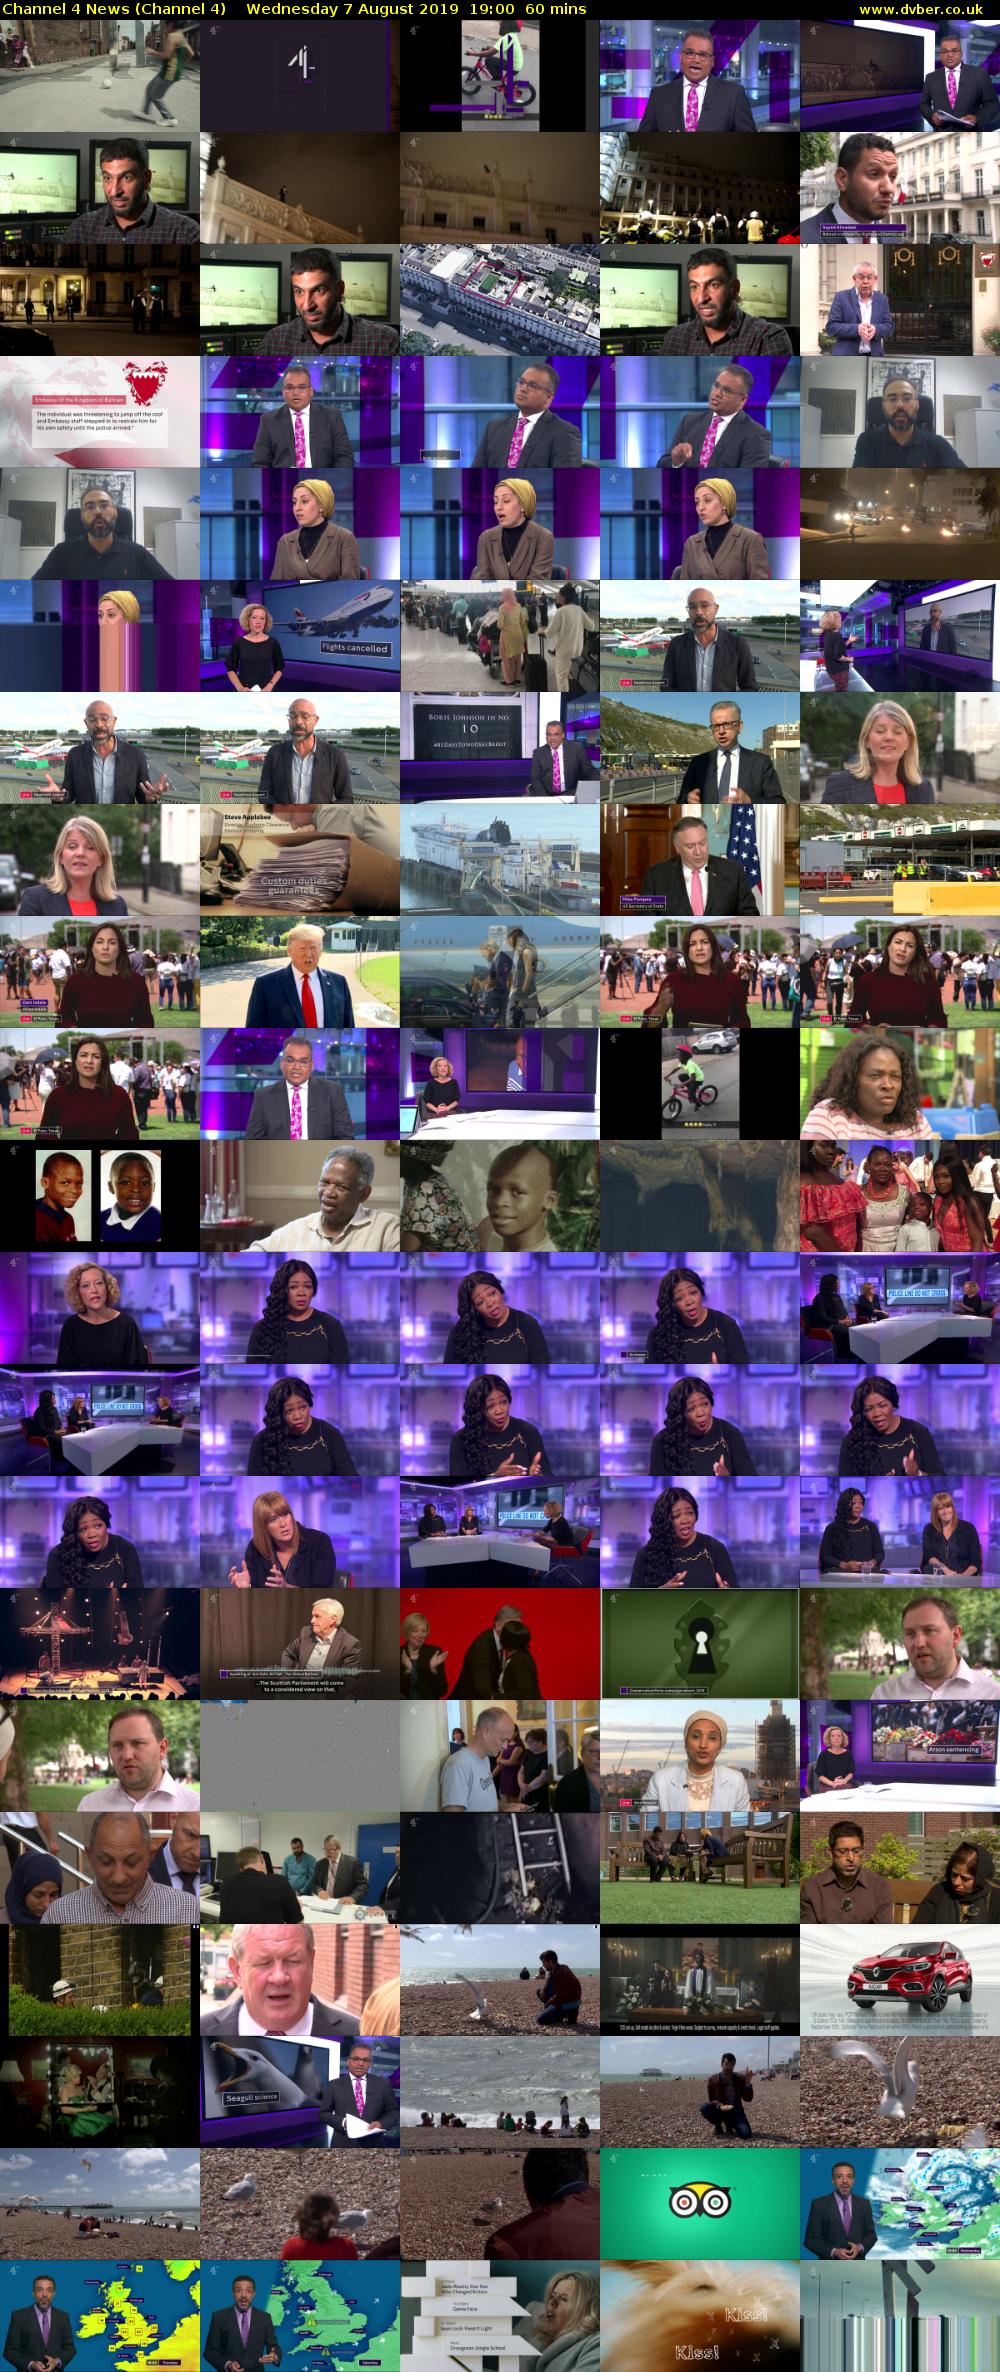 Channel 4 News (Channel 4) Wednesday 7 August 2019 19:00 - 20:00